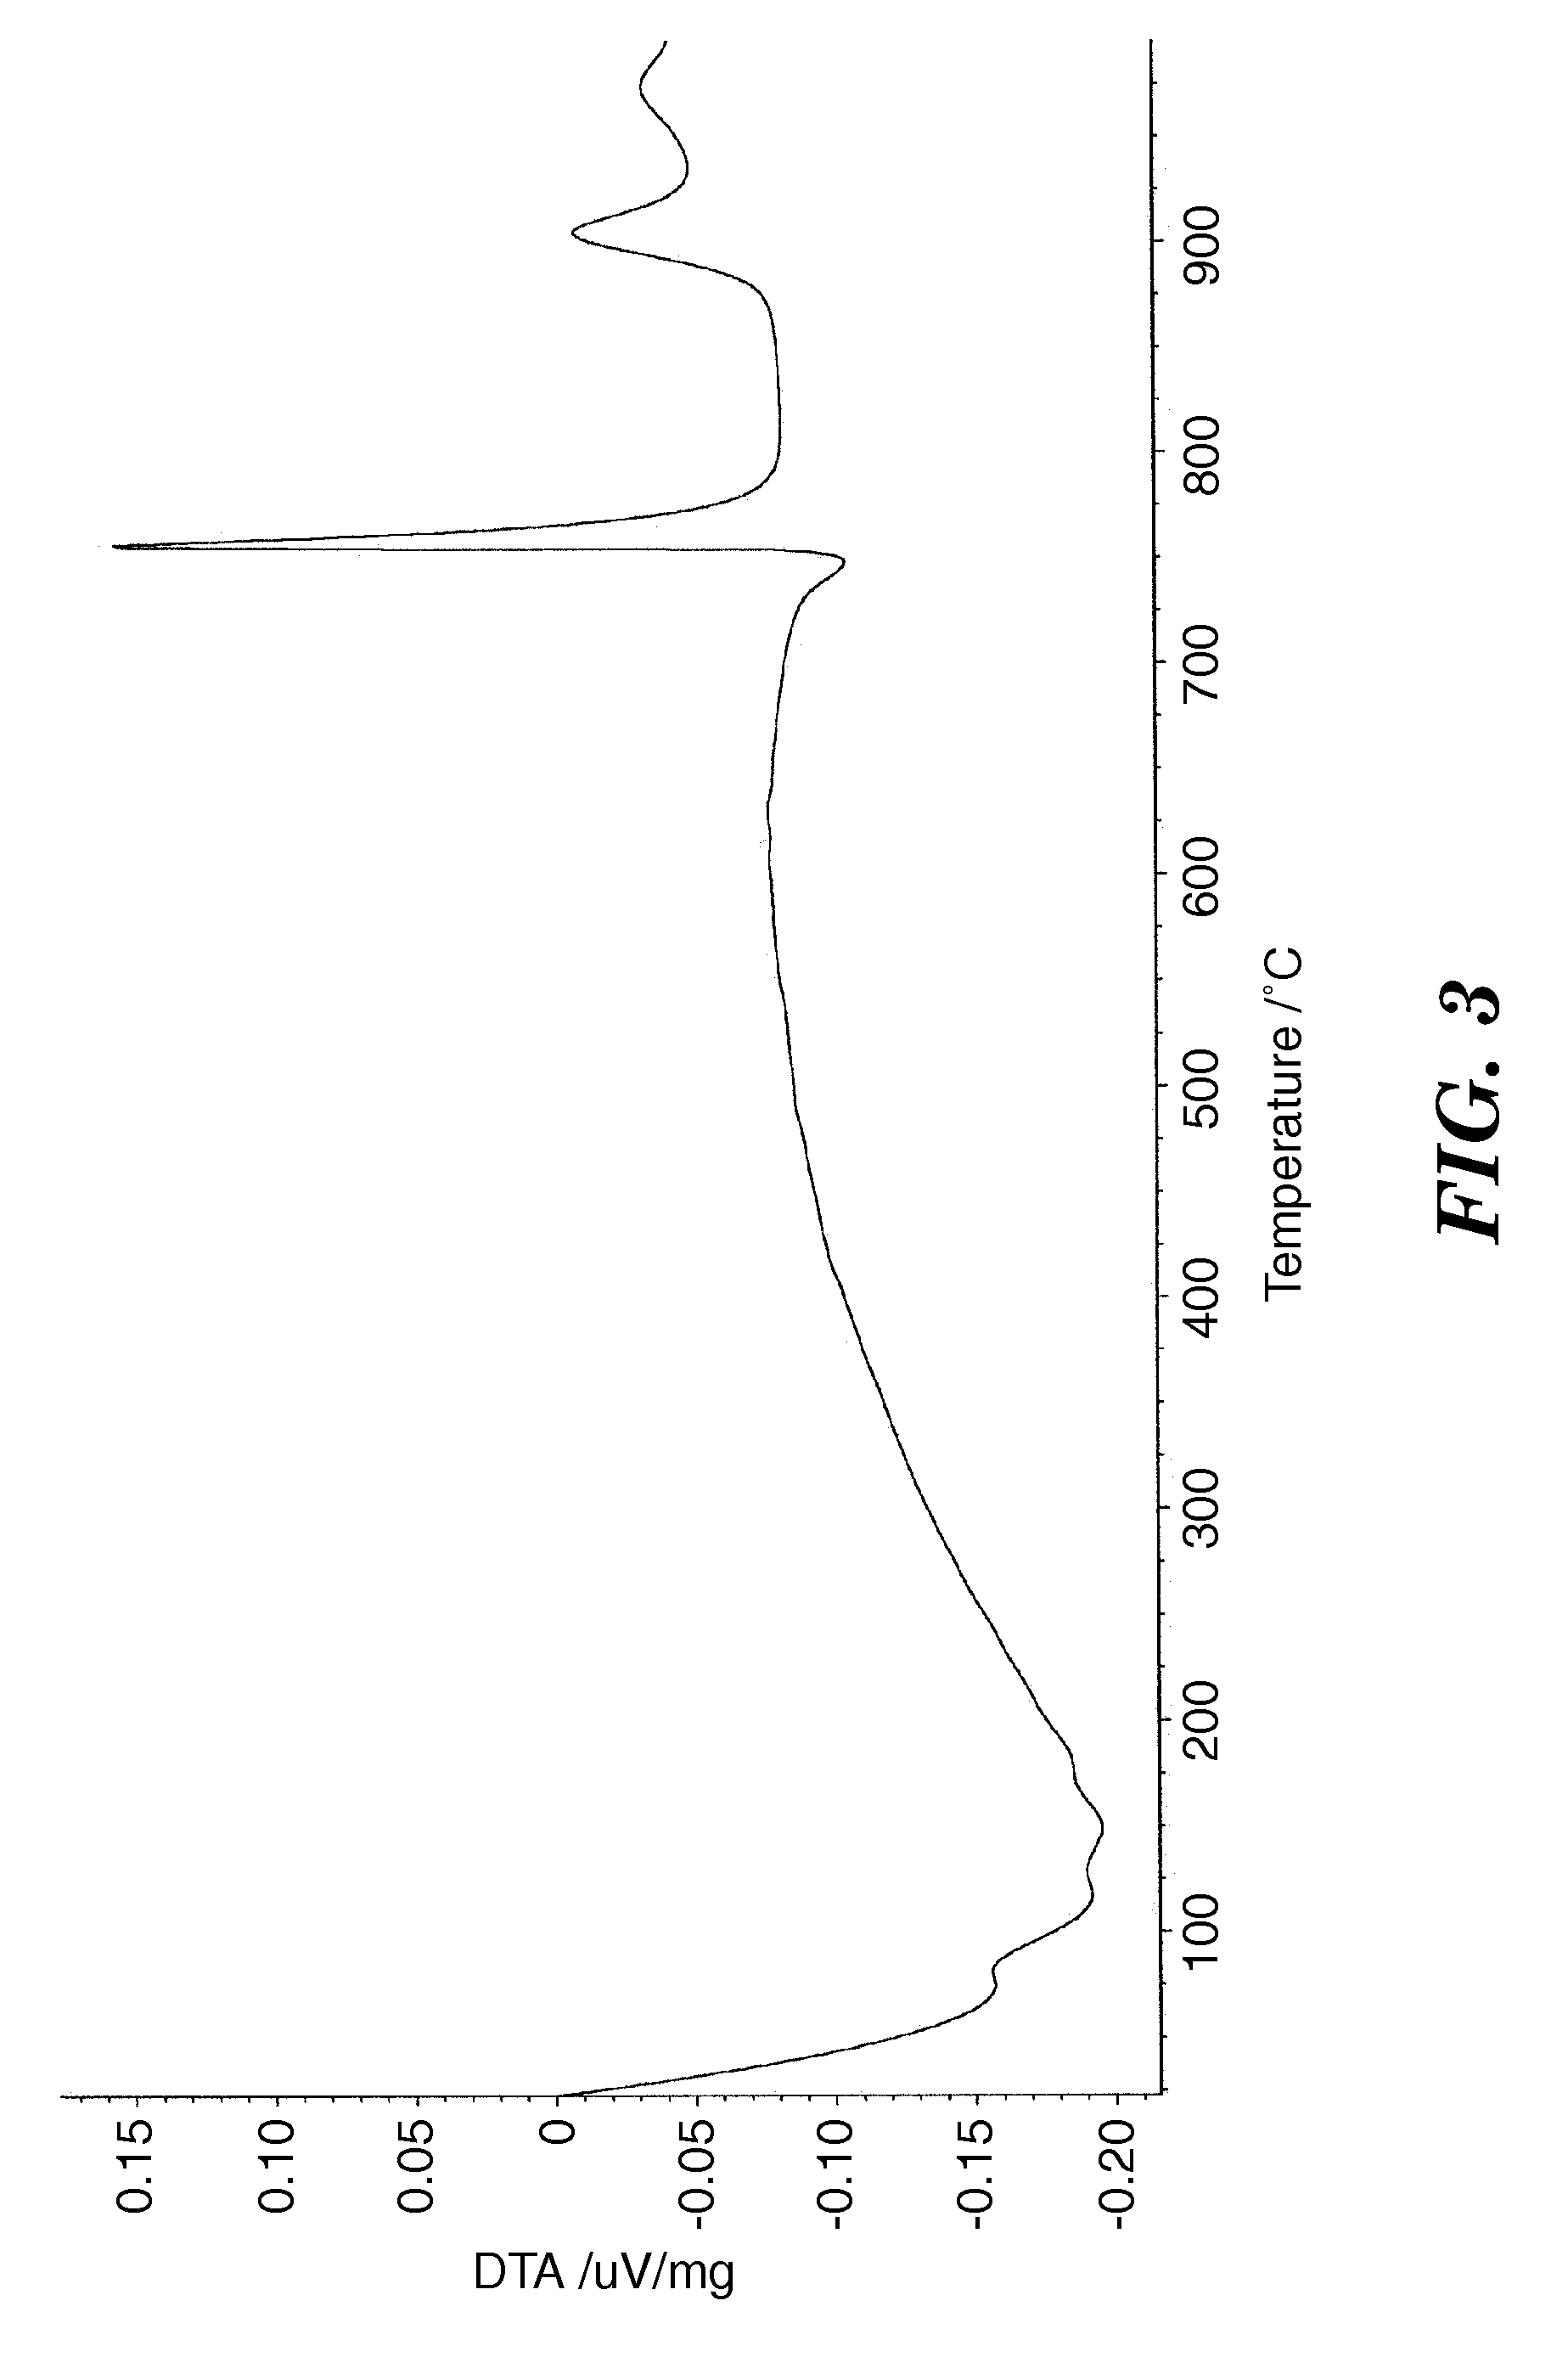 Method of making glass-ceramic and articles made therefrom